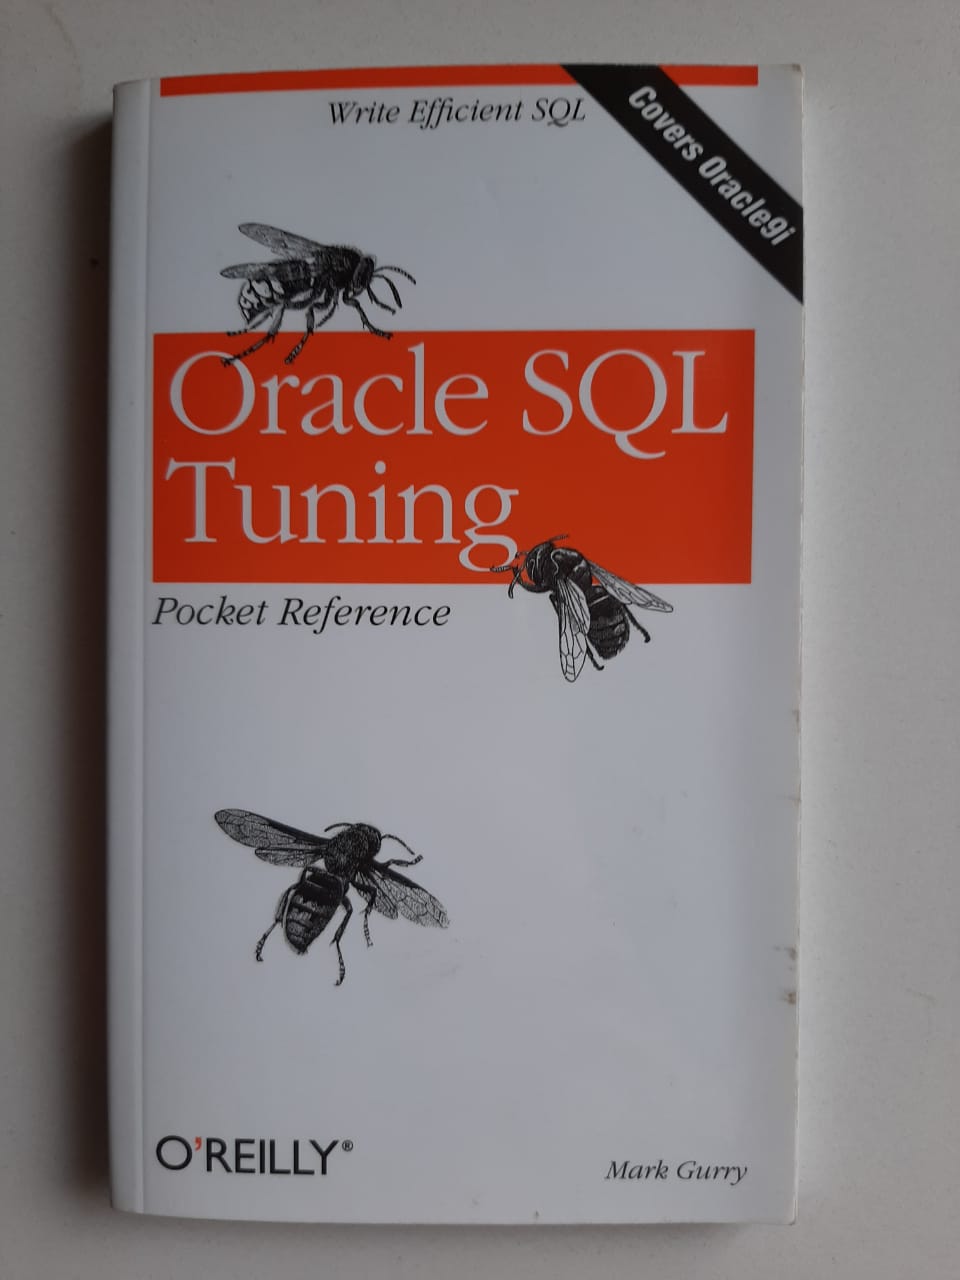 Oracle SQL Tuning. Pocket Reference.